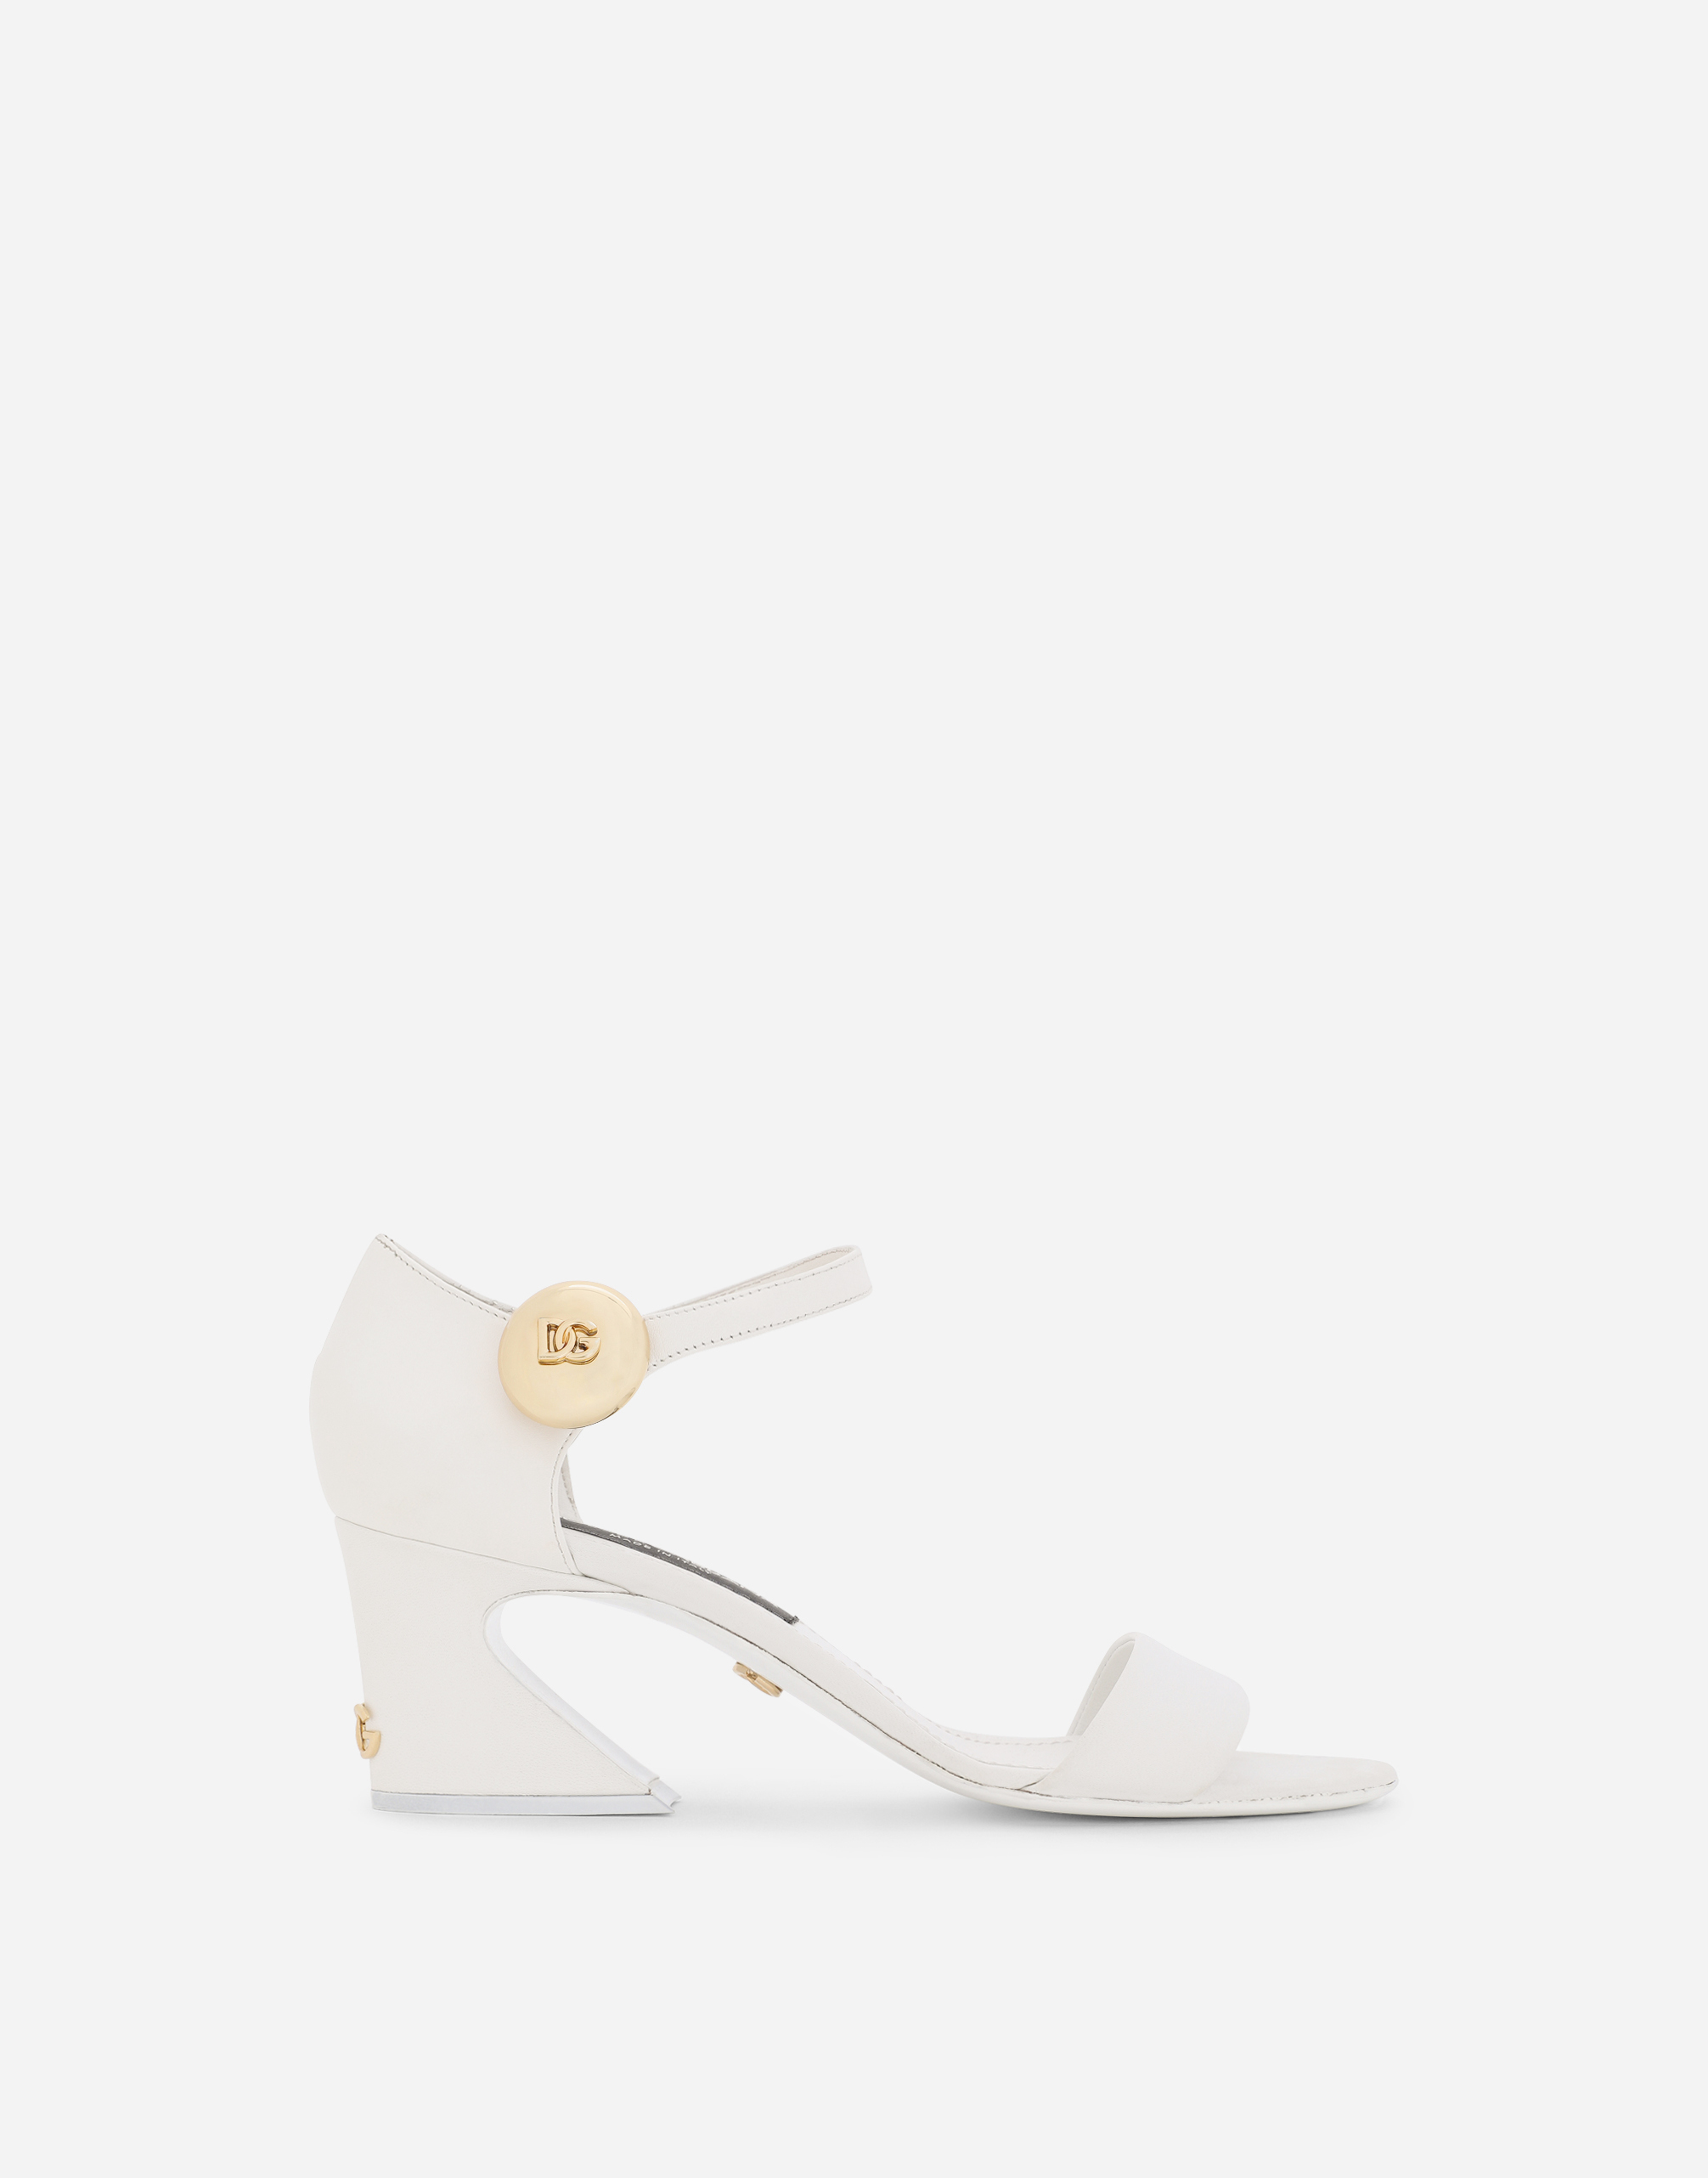 Nappa leather sandals with geometric heel in White